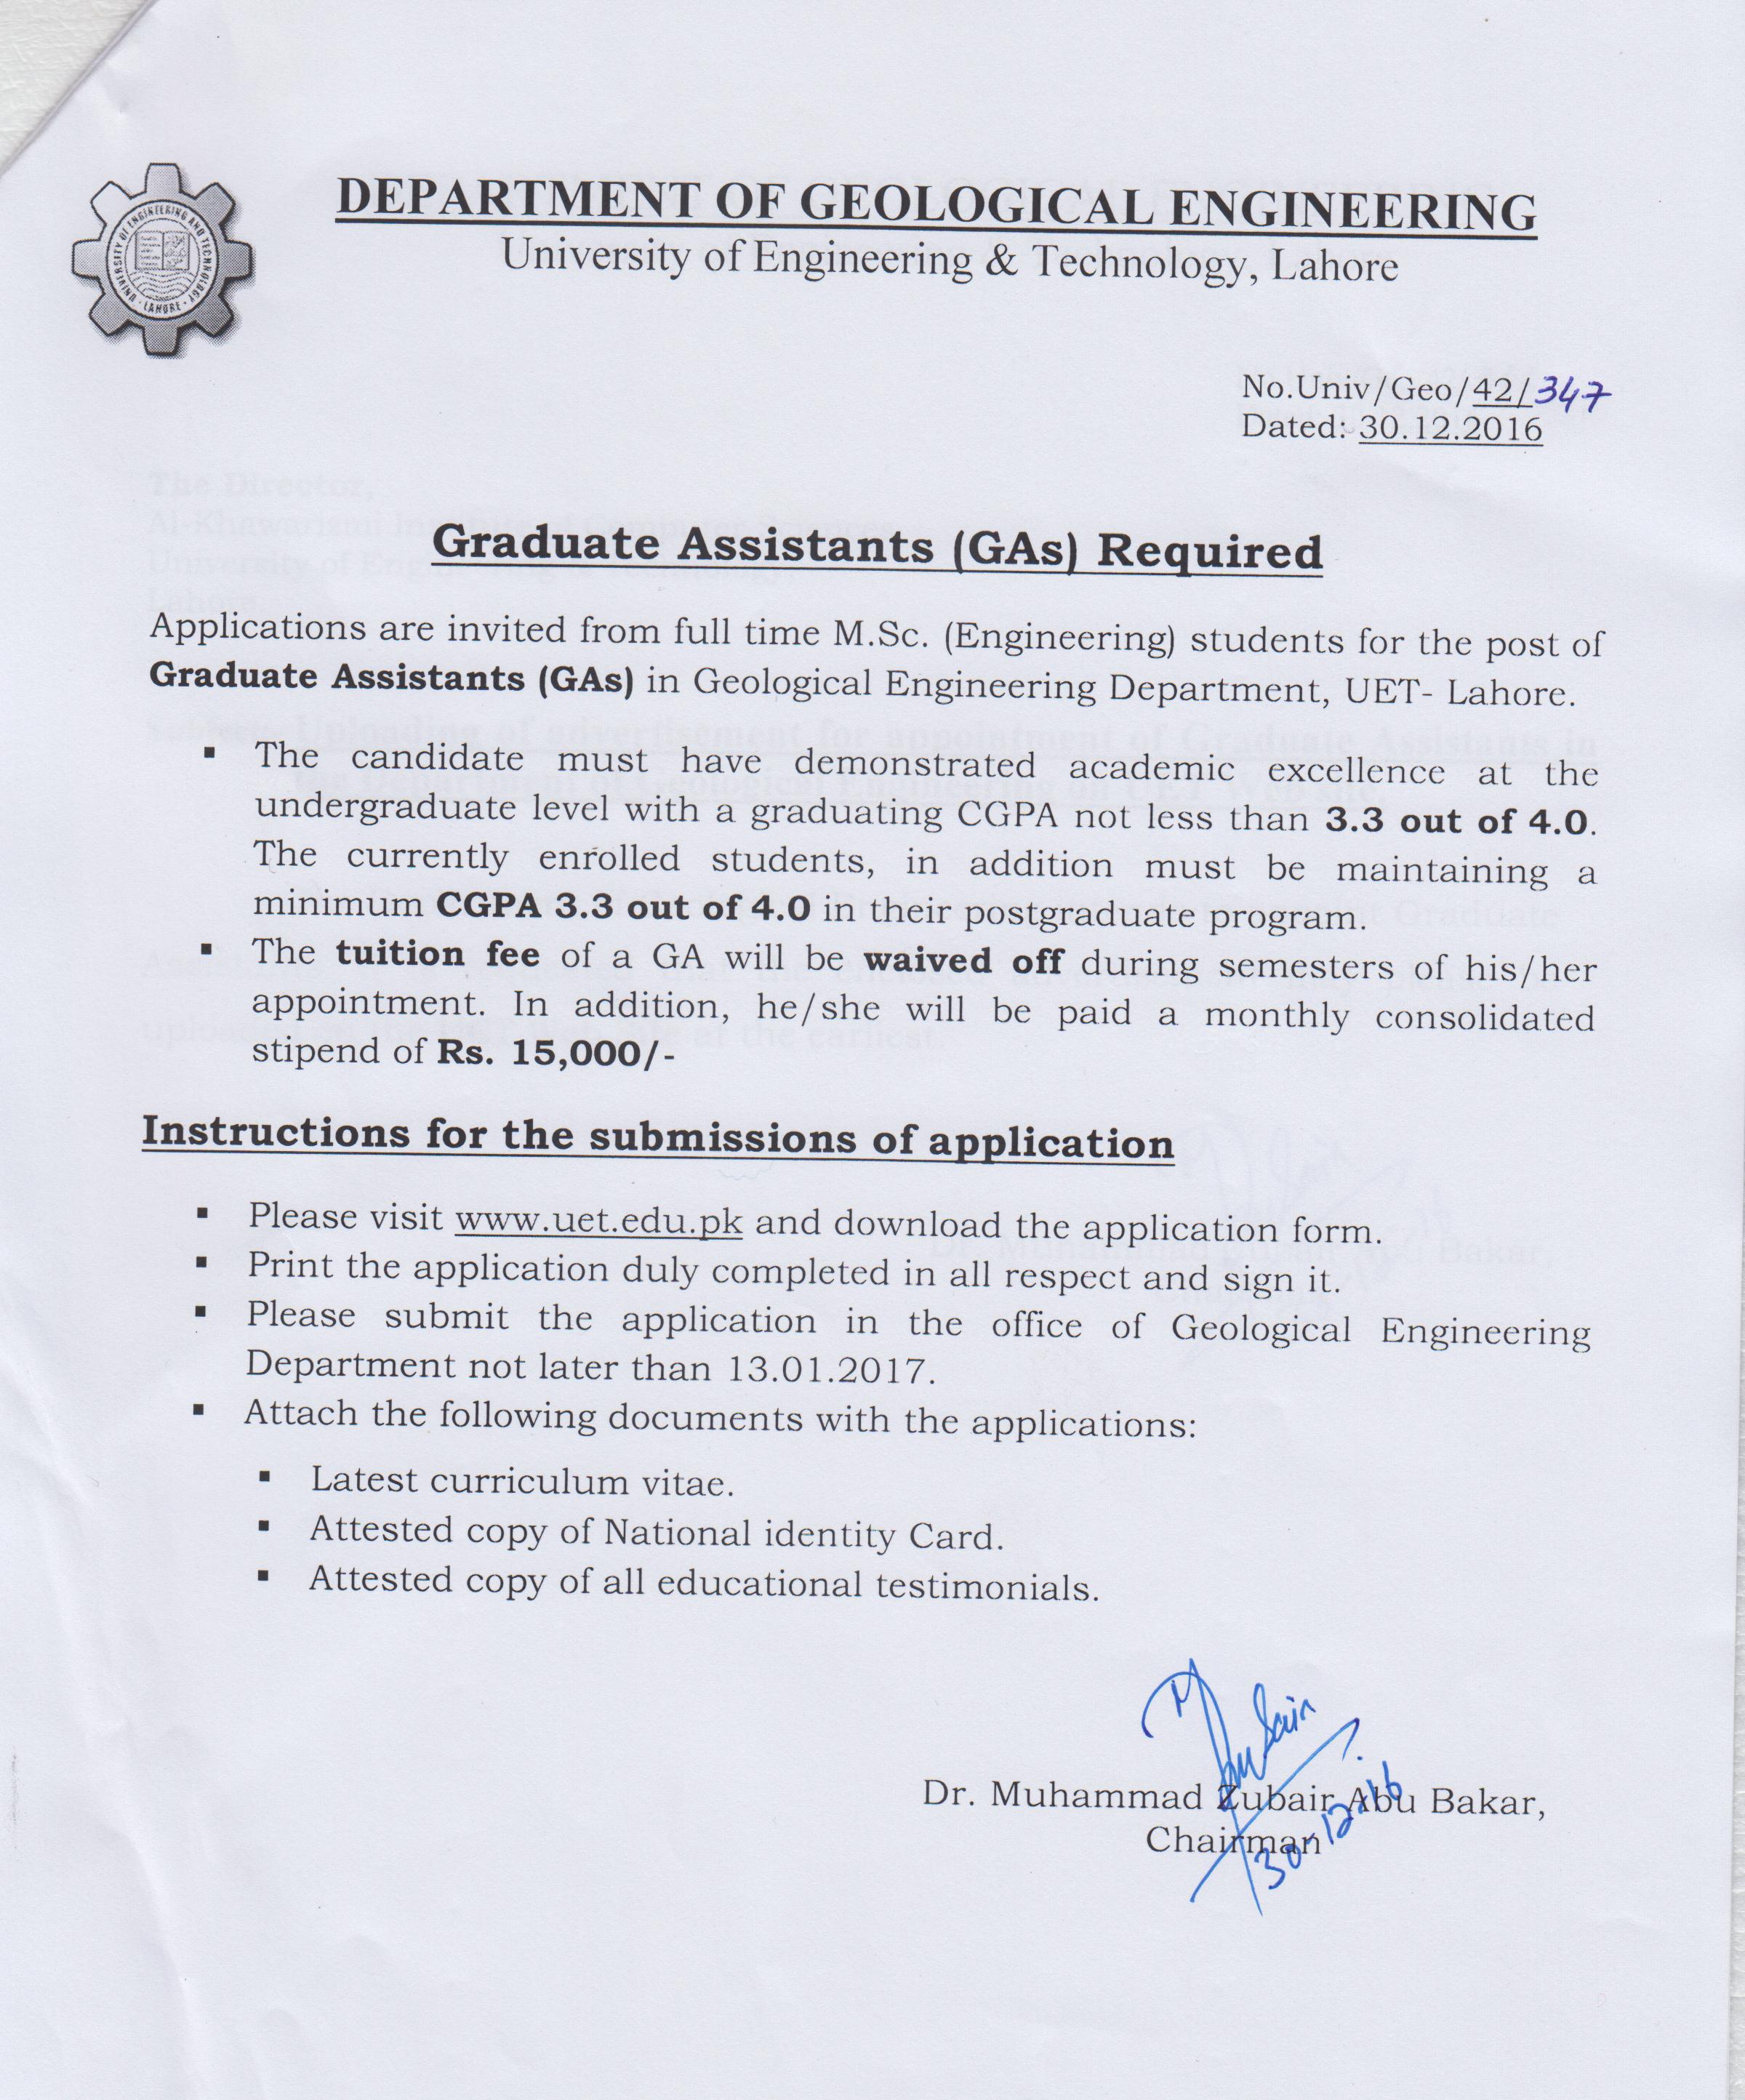 UET Lahore Graduate Assistant required at Department of Geological Engineering